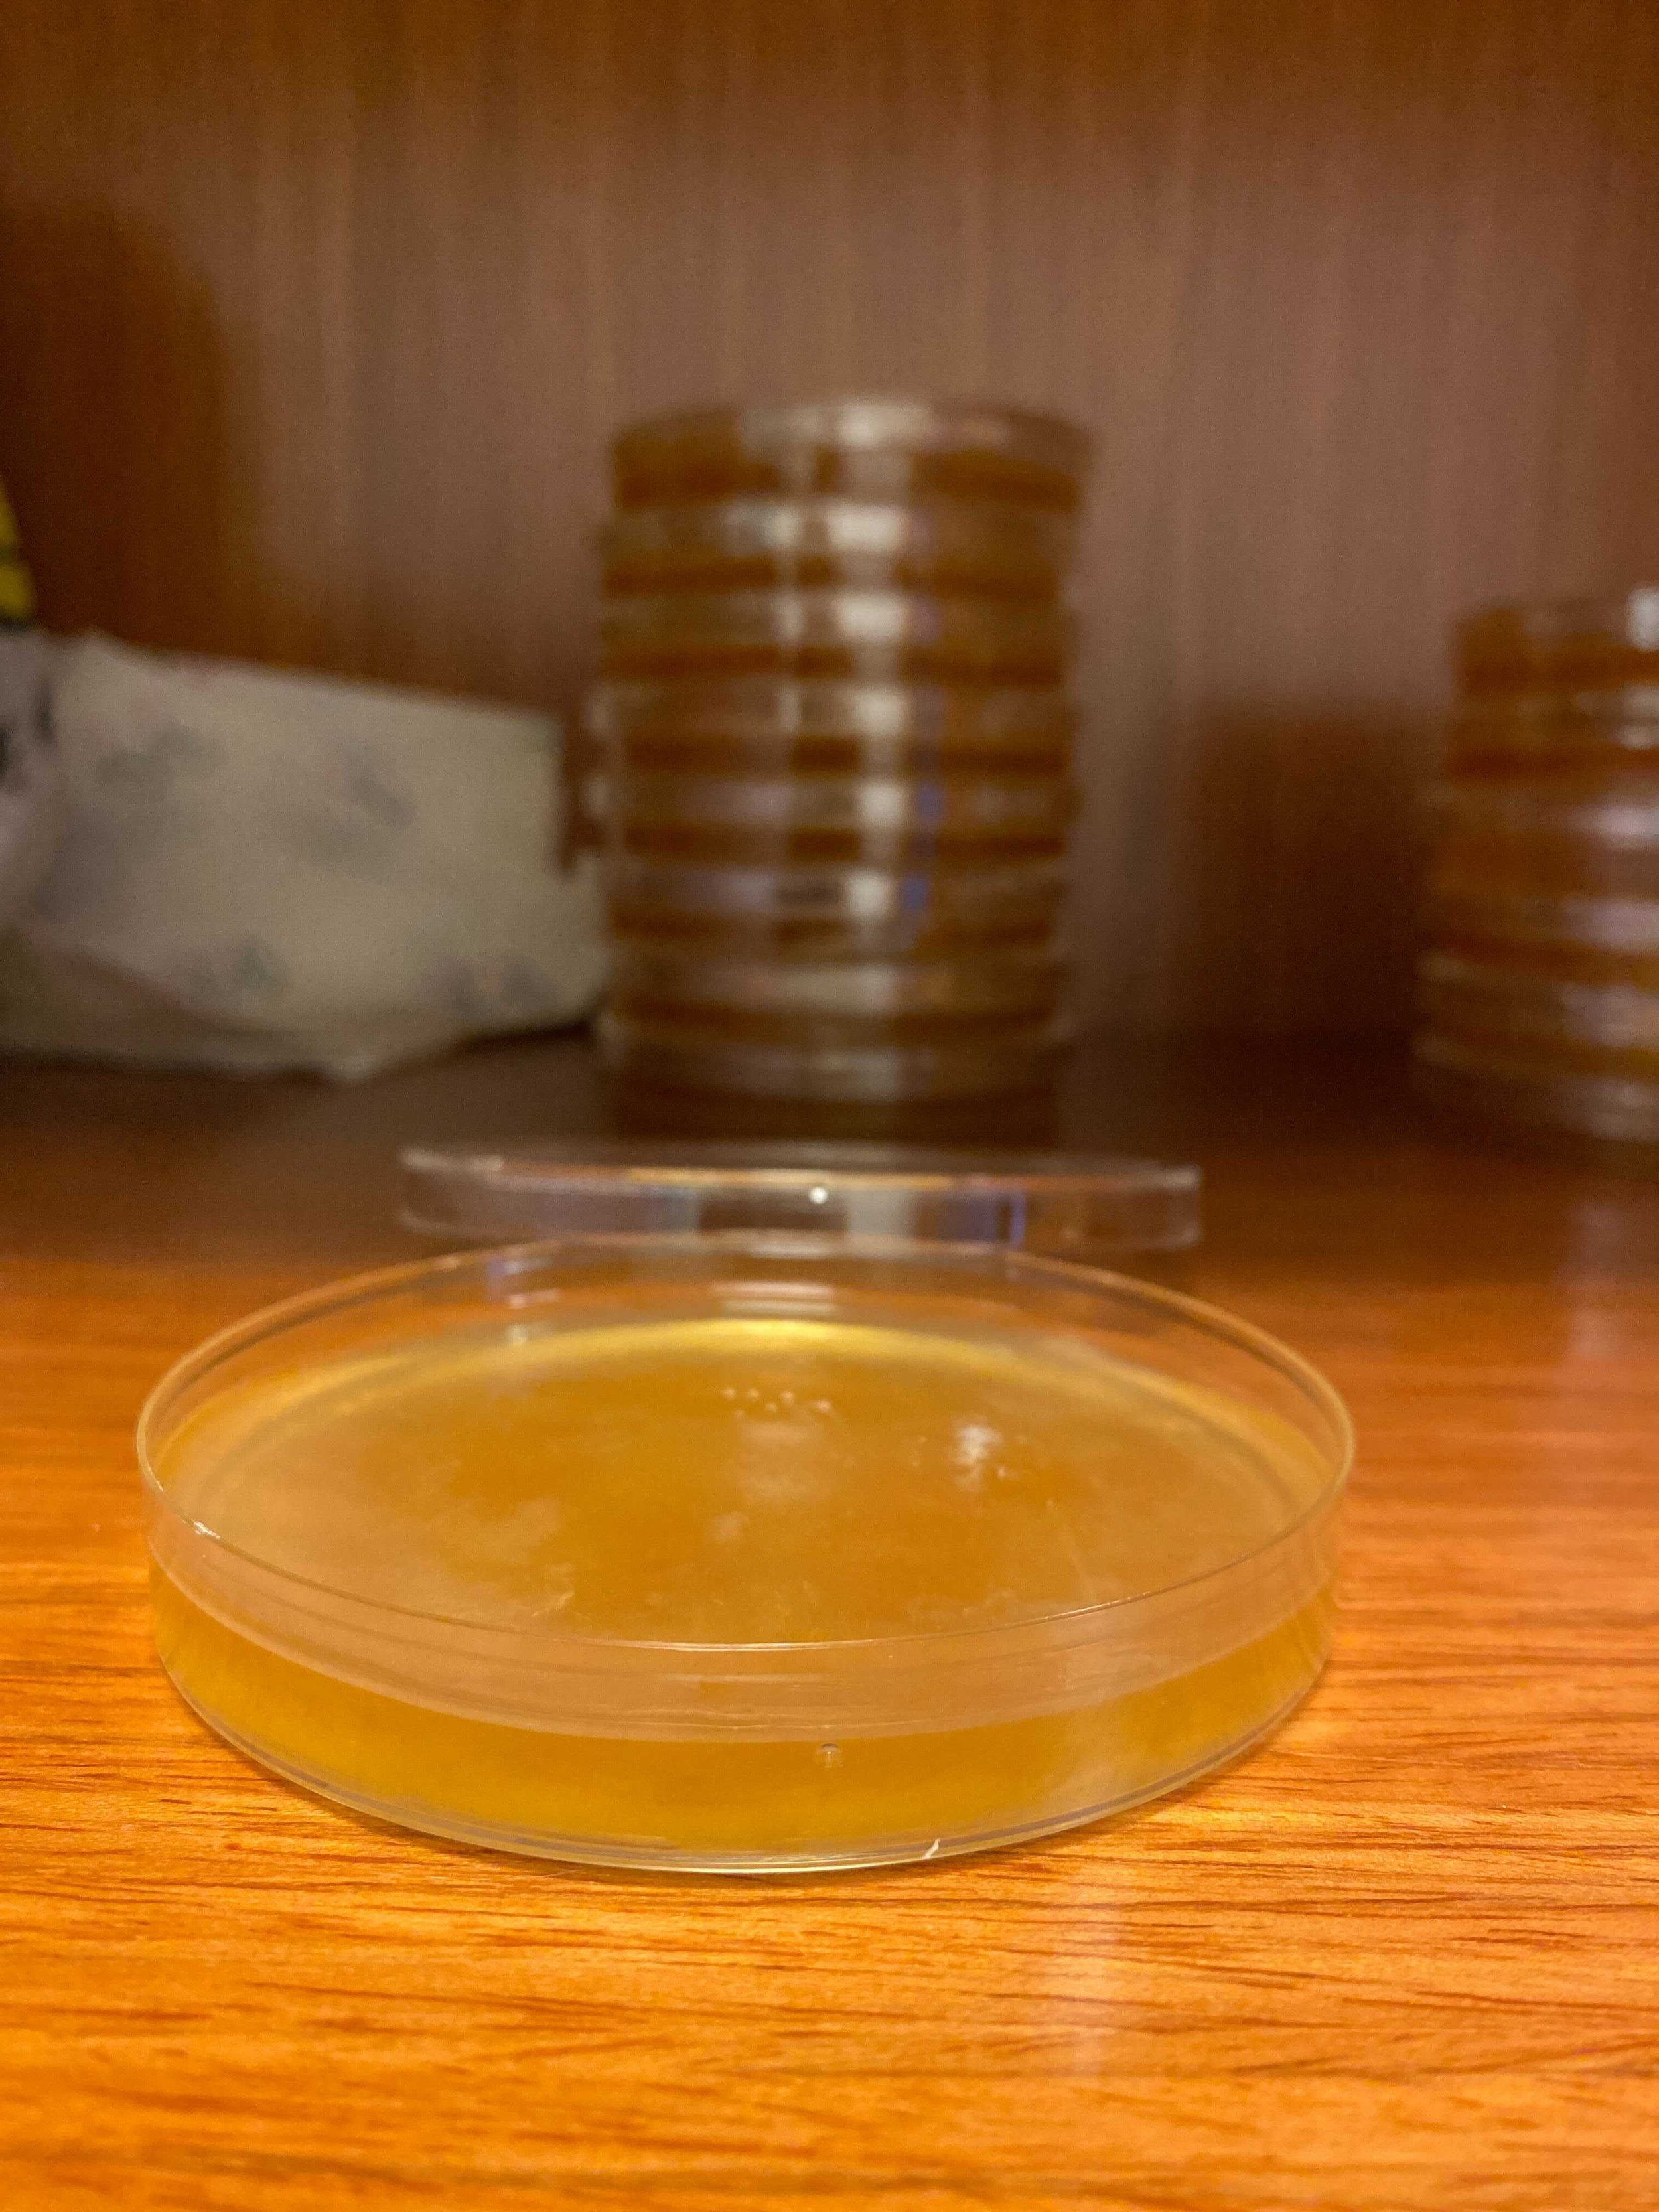 SCOBY growing in petri dishes